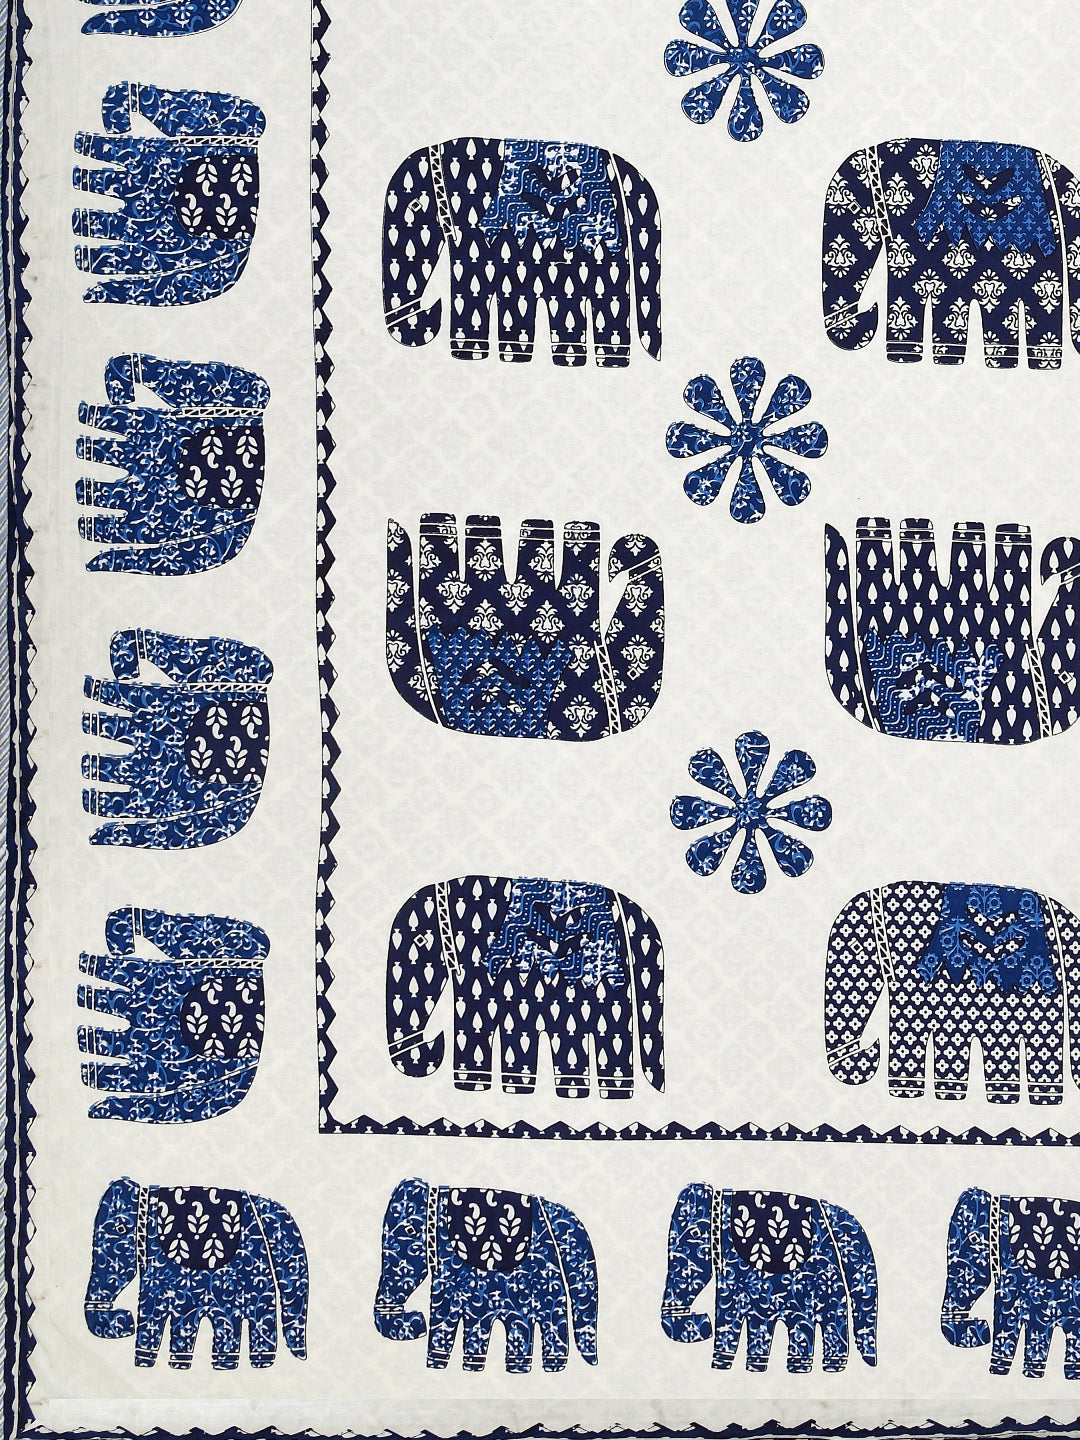 LIVING ROOTS Blue and White Elephant Block Print Reversible AC Dohar- 100% Cotton (21-011-A)